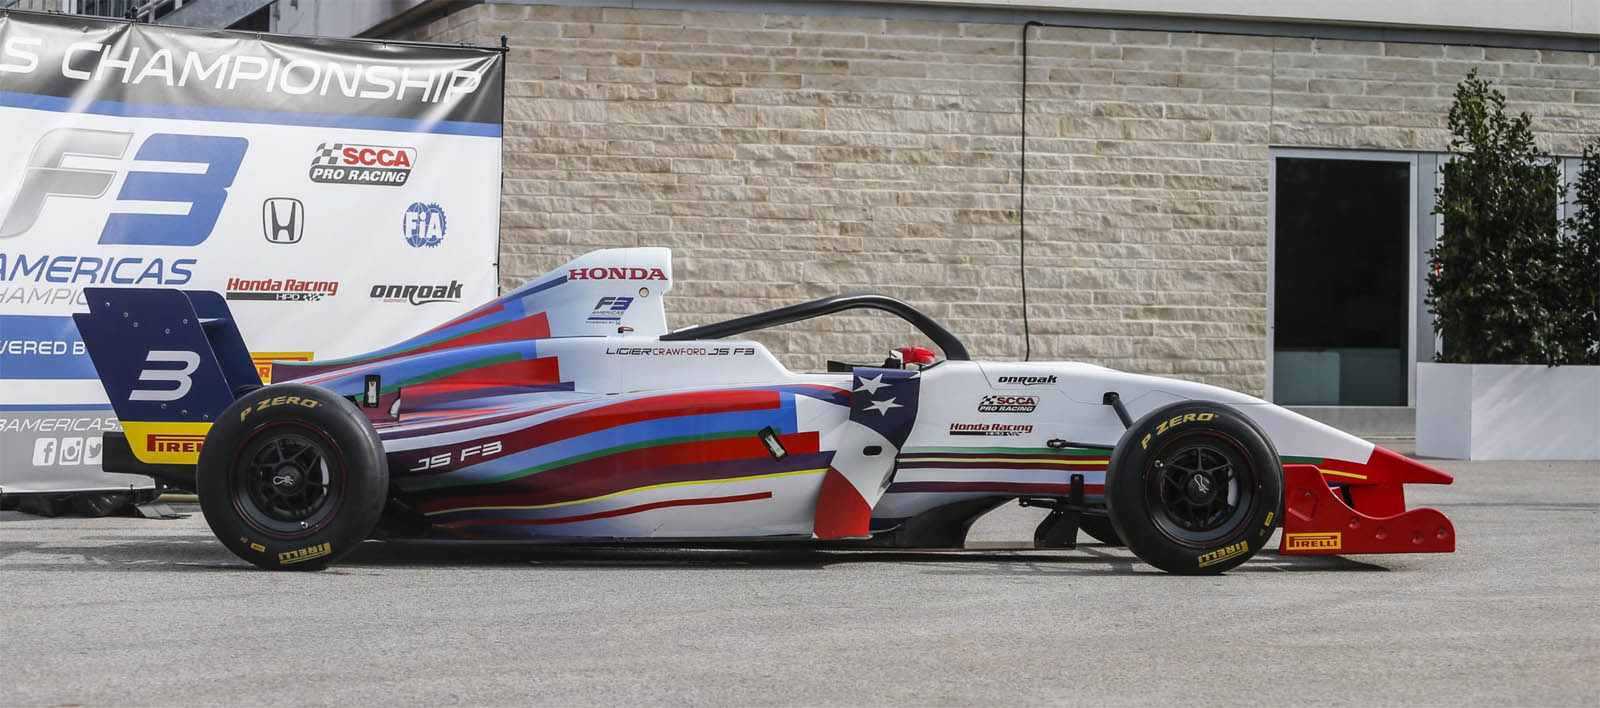 Formula 3 Comes To America With F1-Style Halo, Civic Type R Power ...